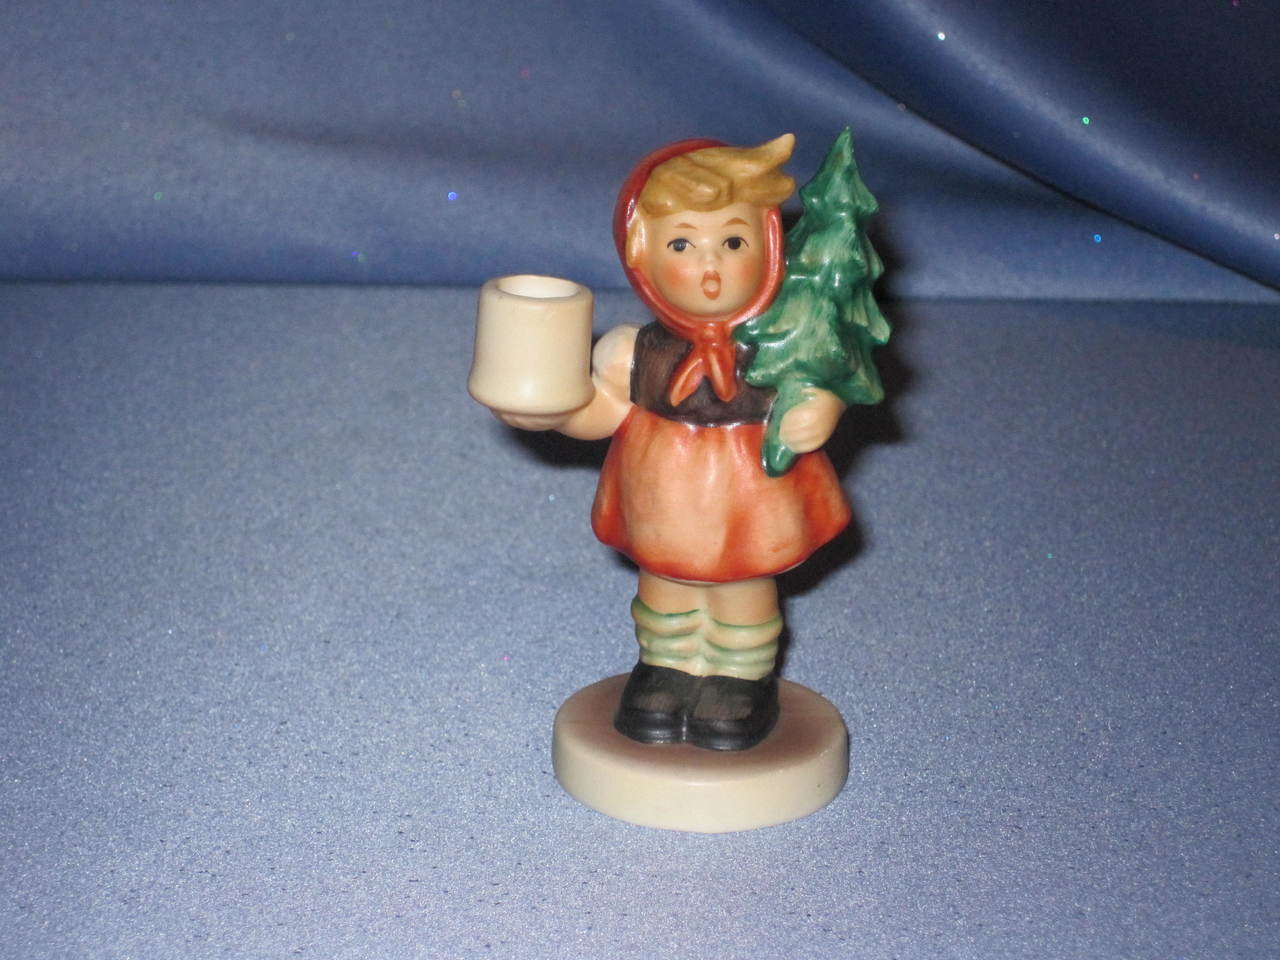 M. I. Hummel "Girl with Tree" Candle Holder Figurine by Goebel. - Now and Then Galleria LLC